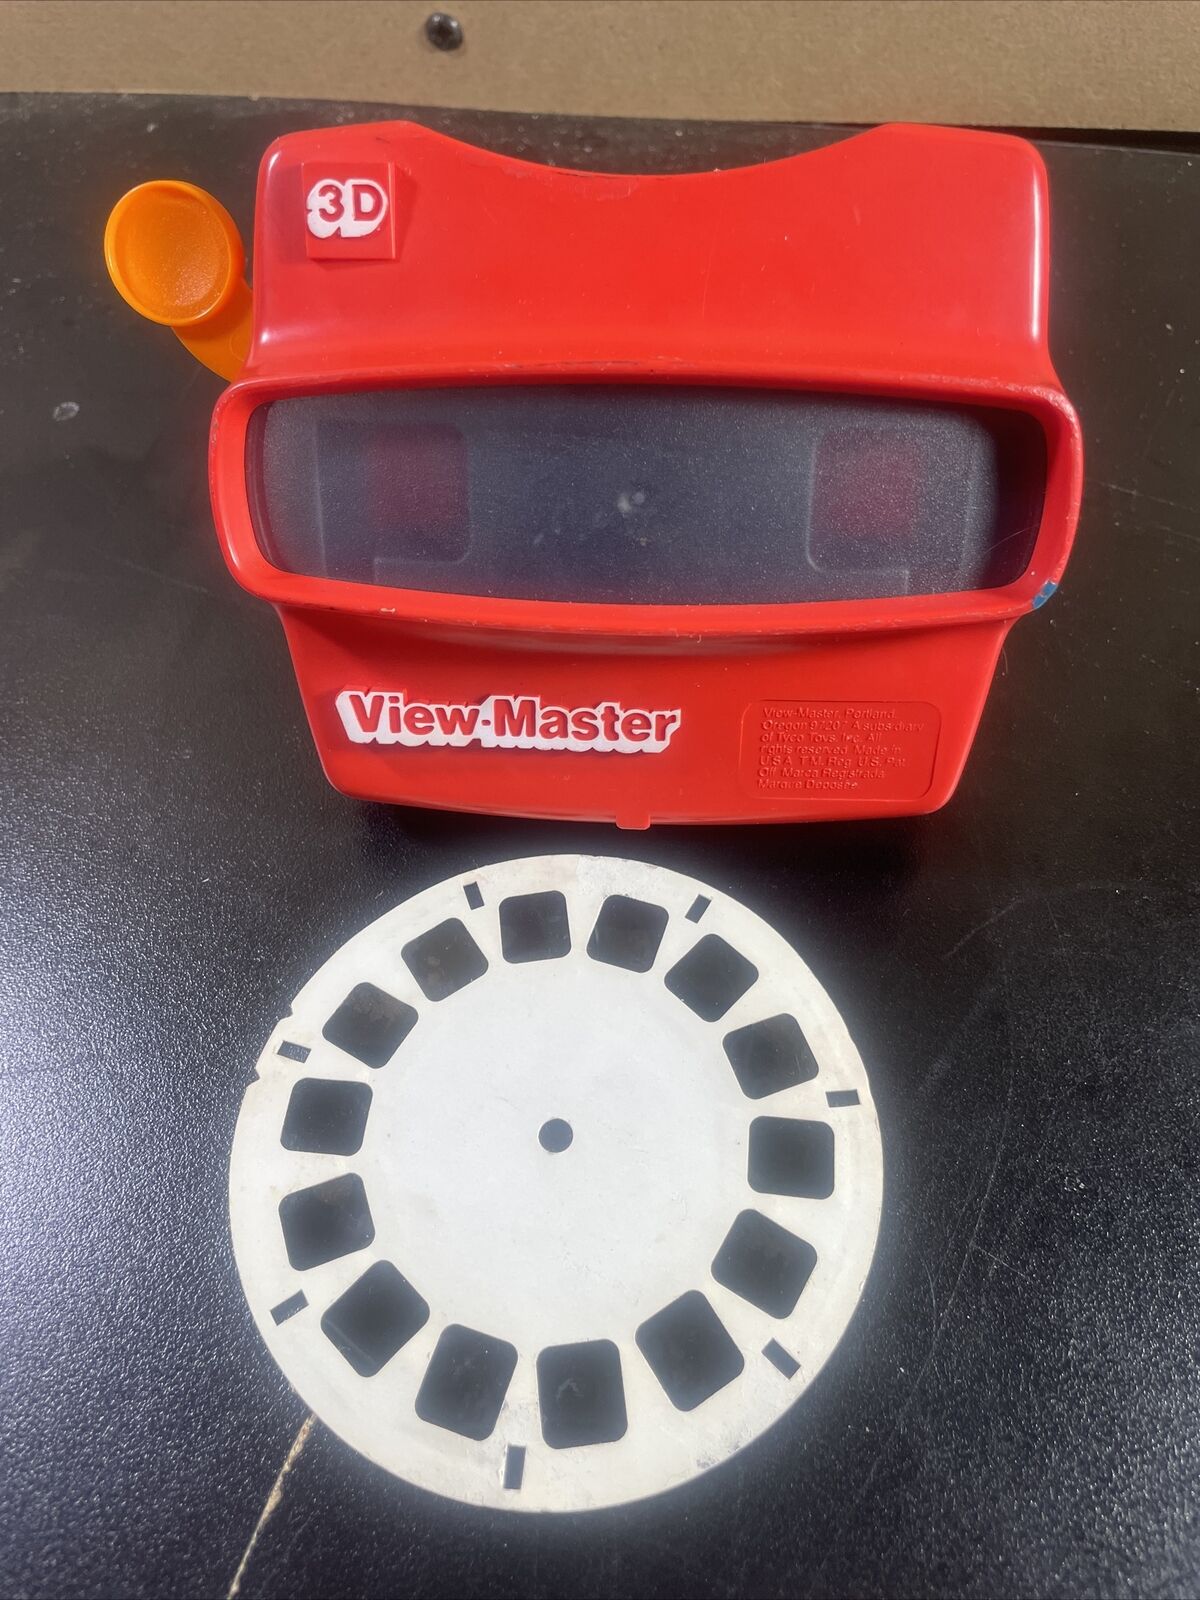 Vintage View Master 3D Viewer Red Classic Viewmaster Toy Slide Viewer USA